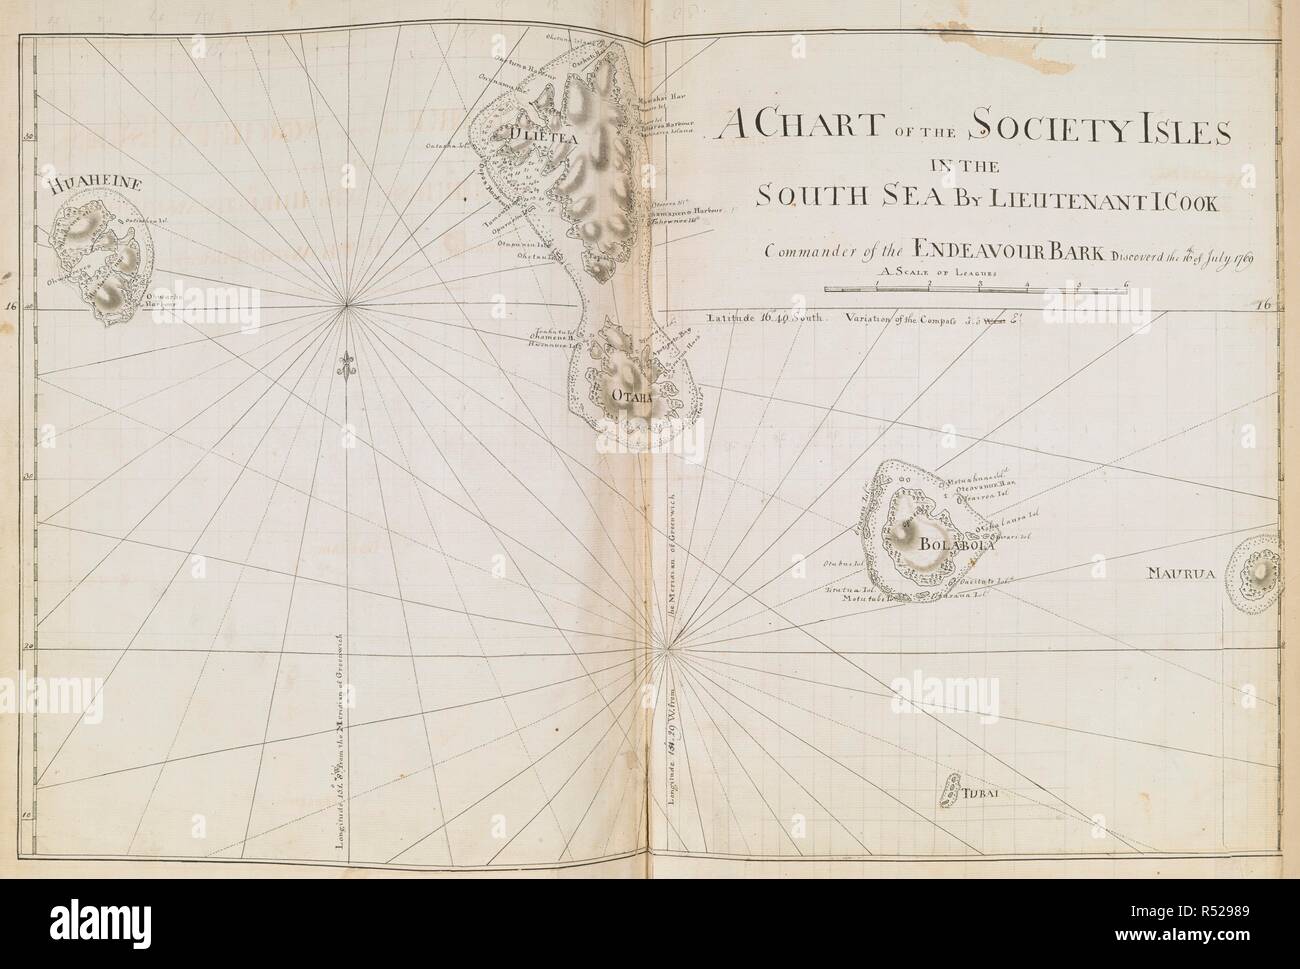 A chart of the Society Isles, by Lieut. James Cook, in his first voyage 1768-1771 on a scale of one league to an inch. Charts, Plans, Views, and Drawings taken on board the Endeavour during Captain Cook's First Voyage, 1768-1771. 1768-1771. Source: Add. 7085, No.11. Stock Photo